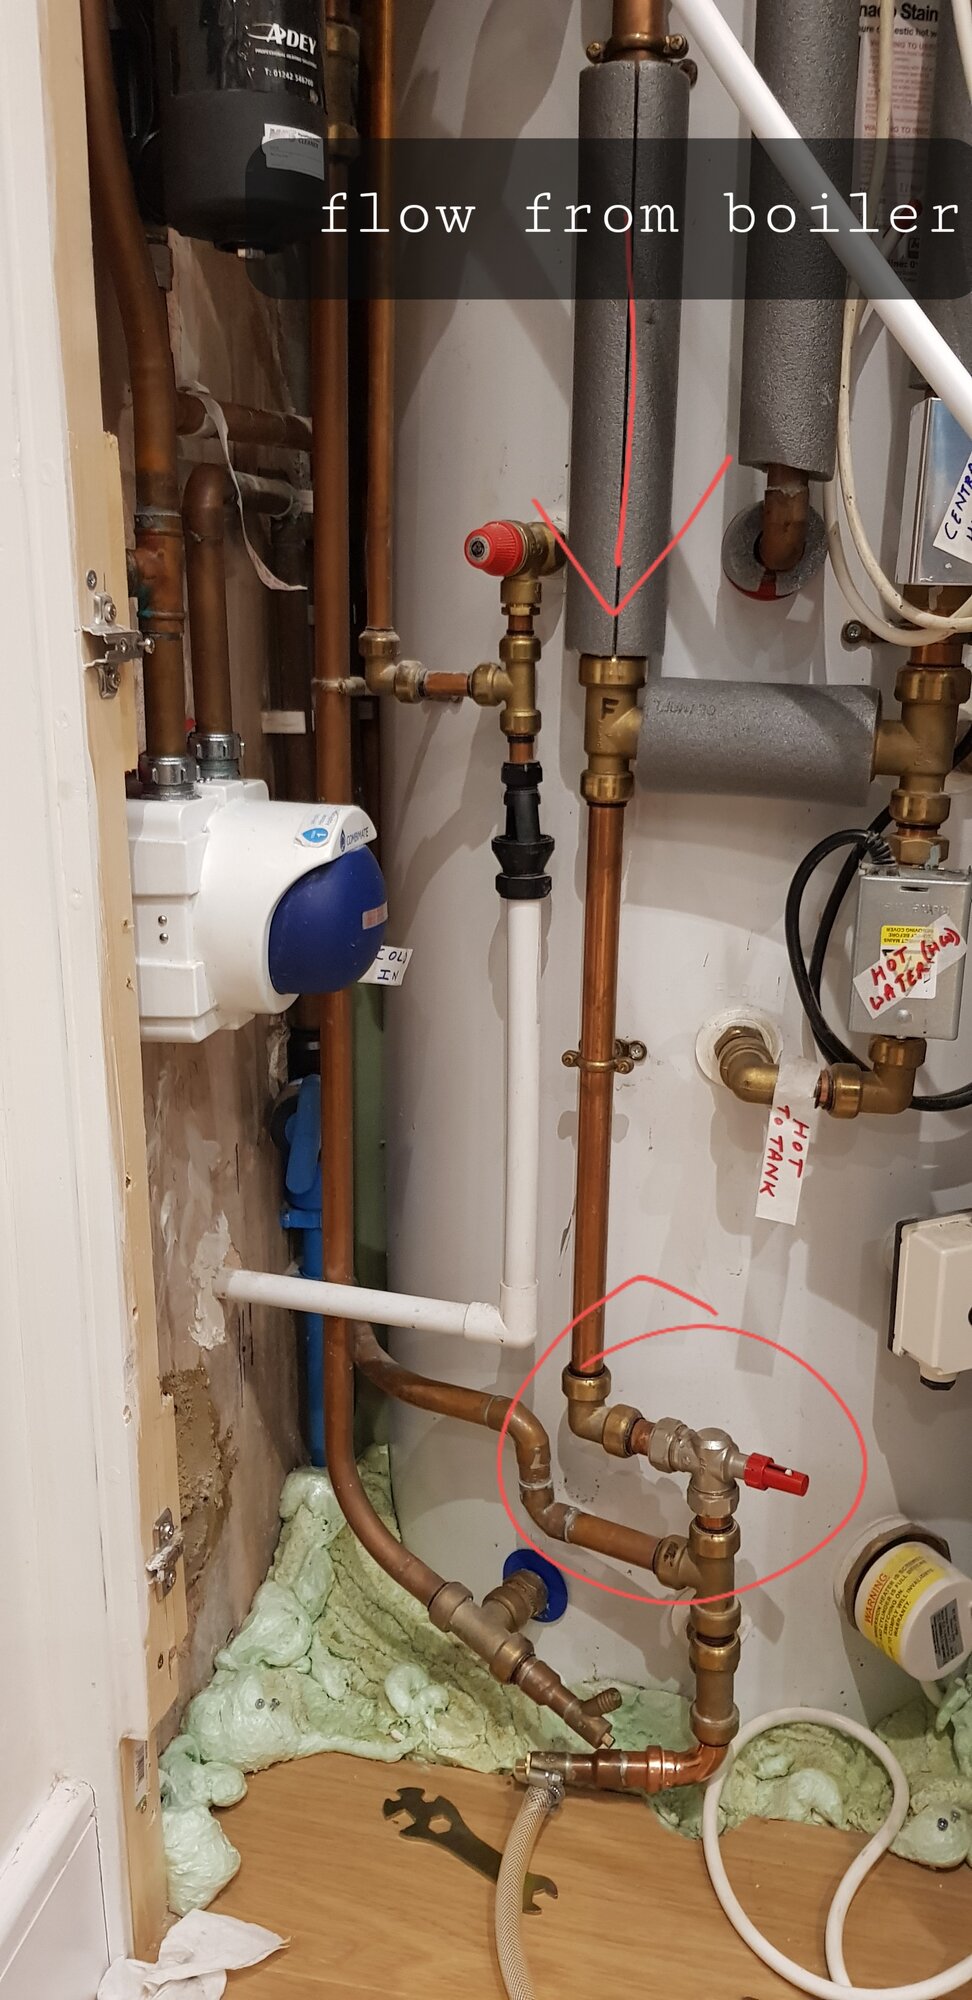 Boiler flow with abv